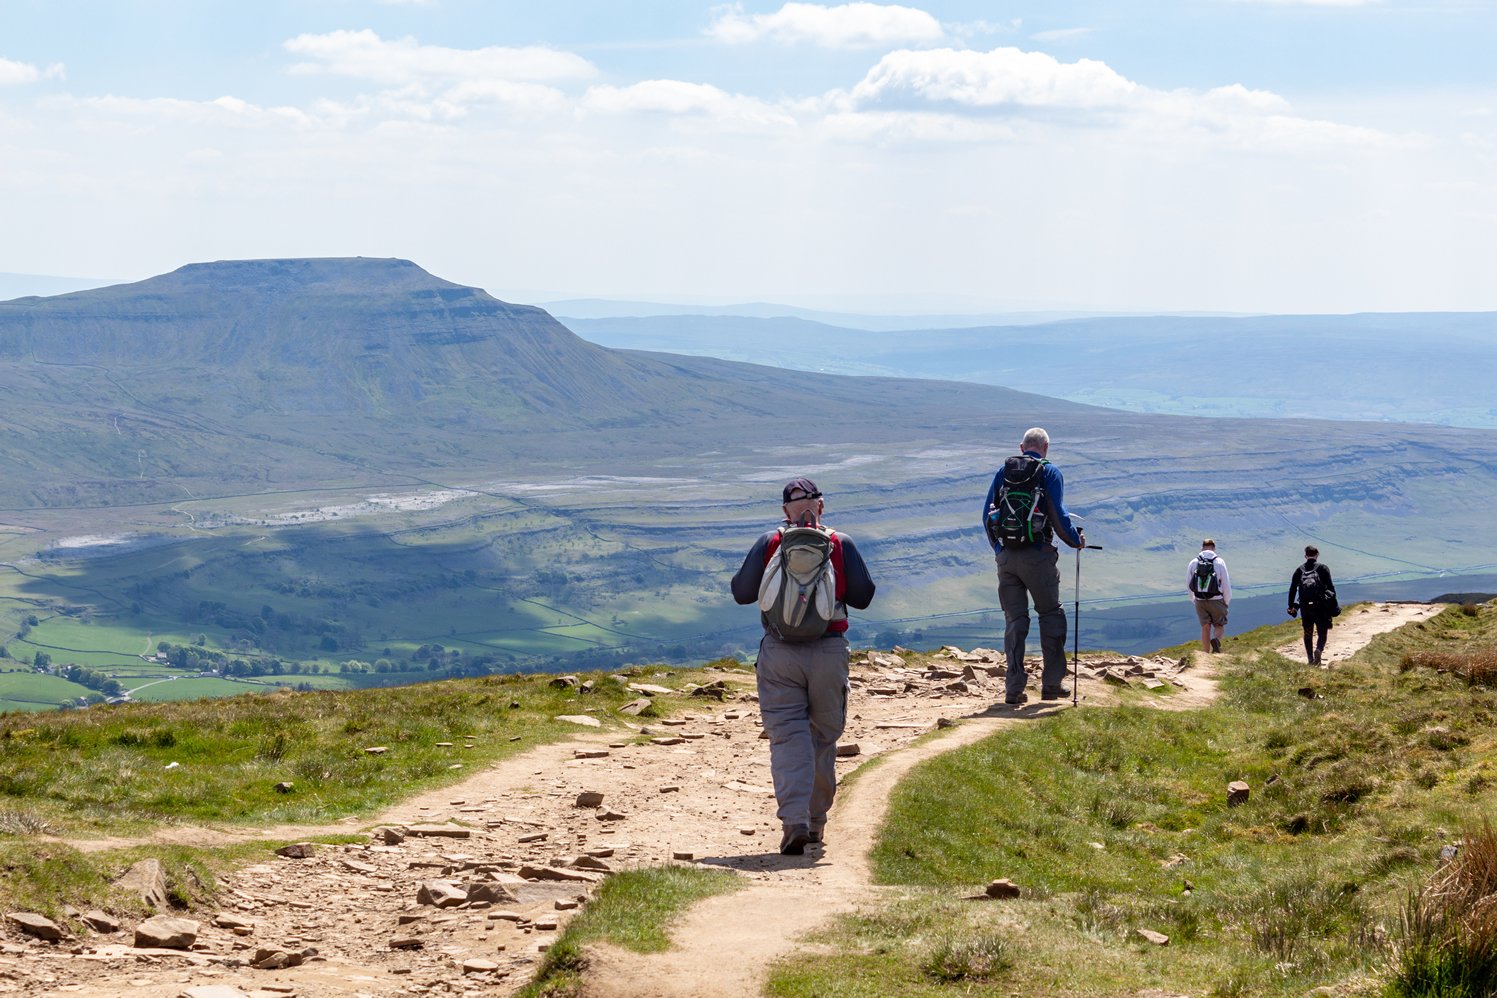 Image name walkers descending whernside view of ingleborough sunny yorkshire the 16 image from the post Stride Out in Yorkshire: Celebrate National Walking Day in Yorkshire.com.